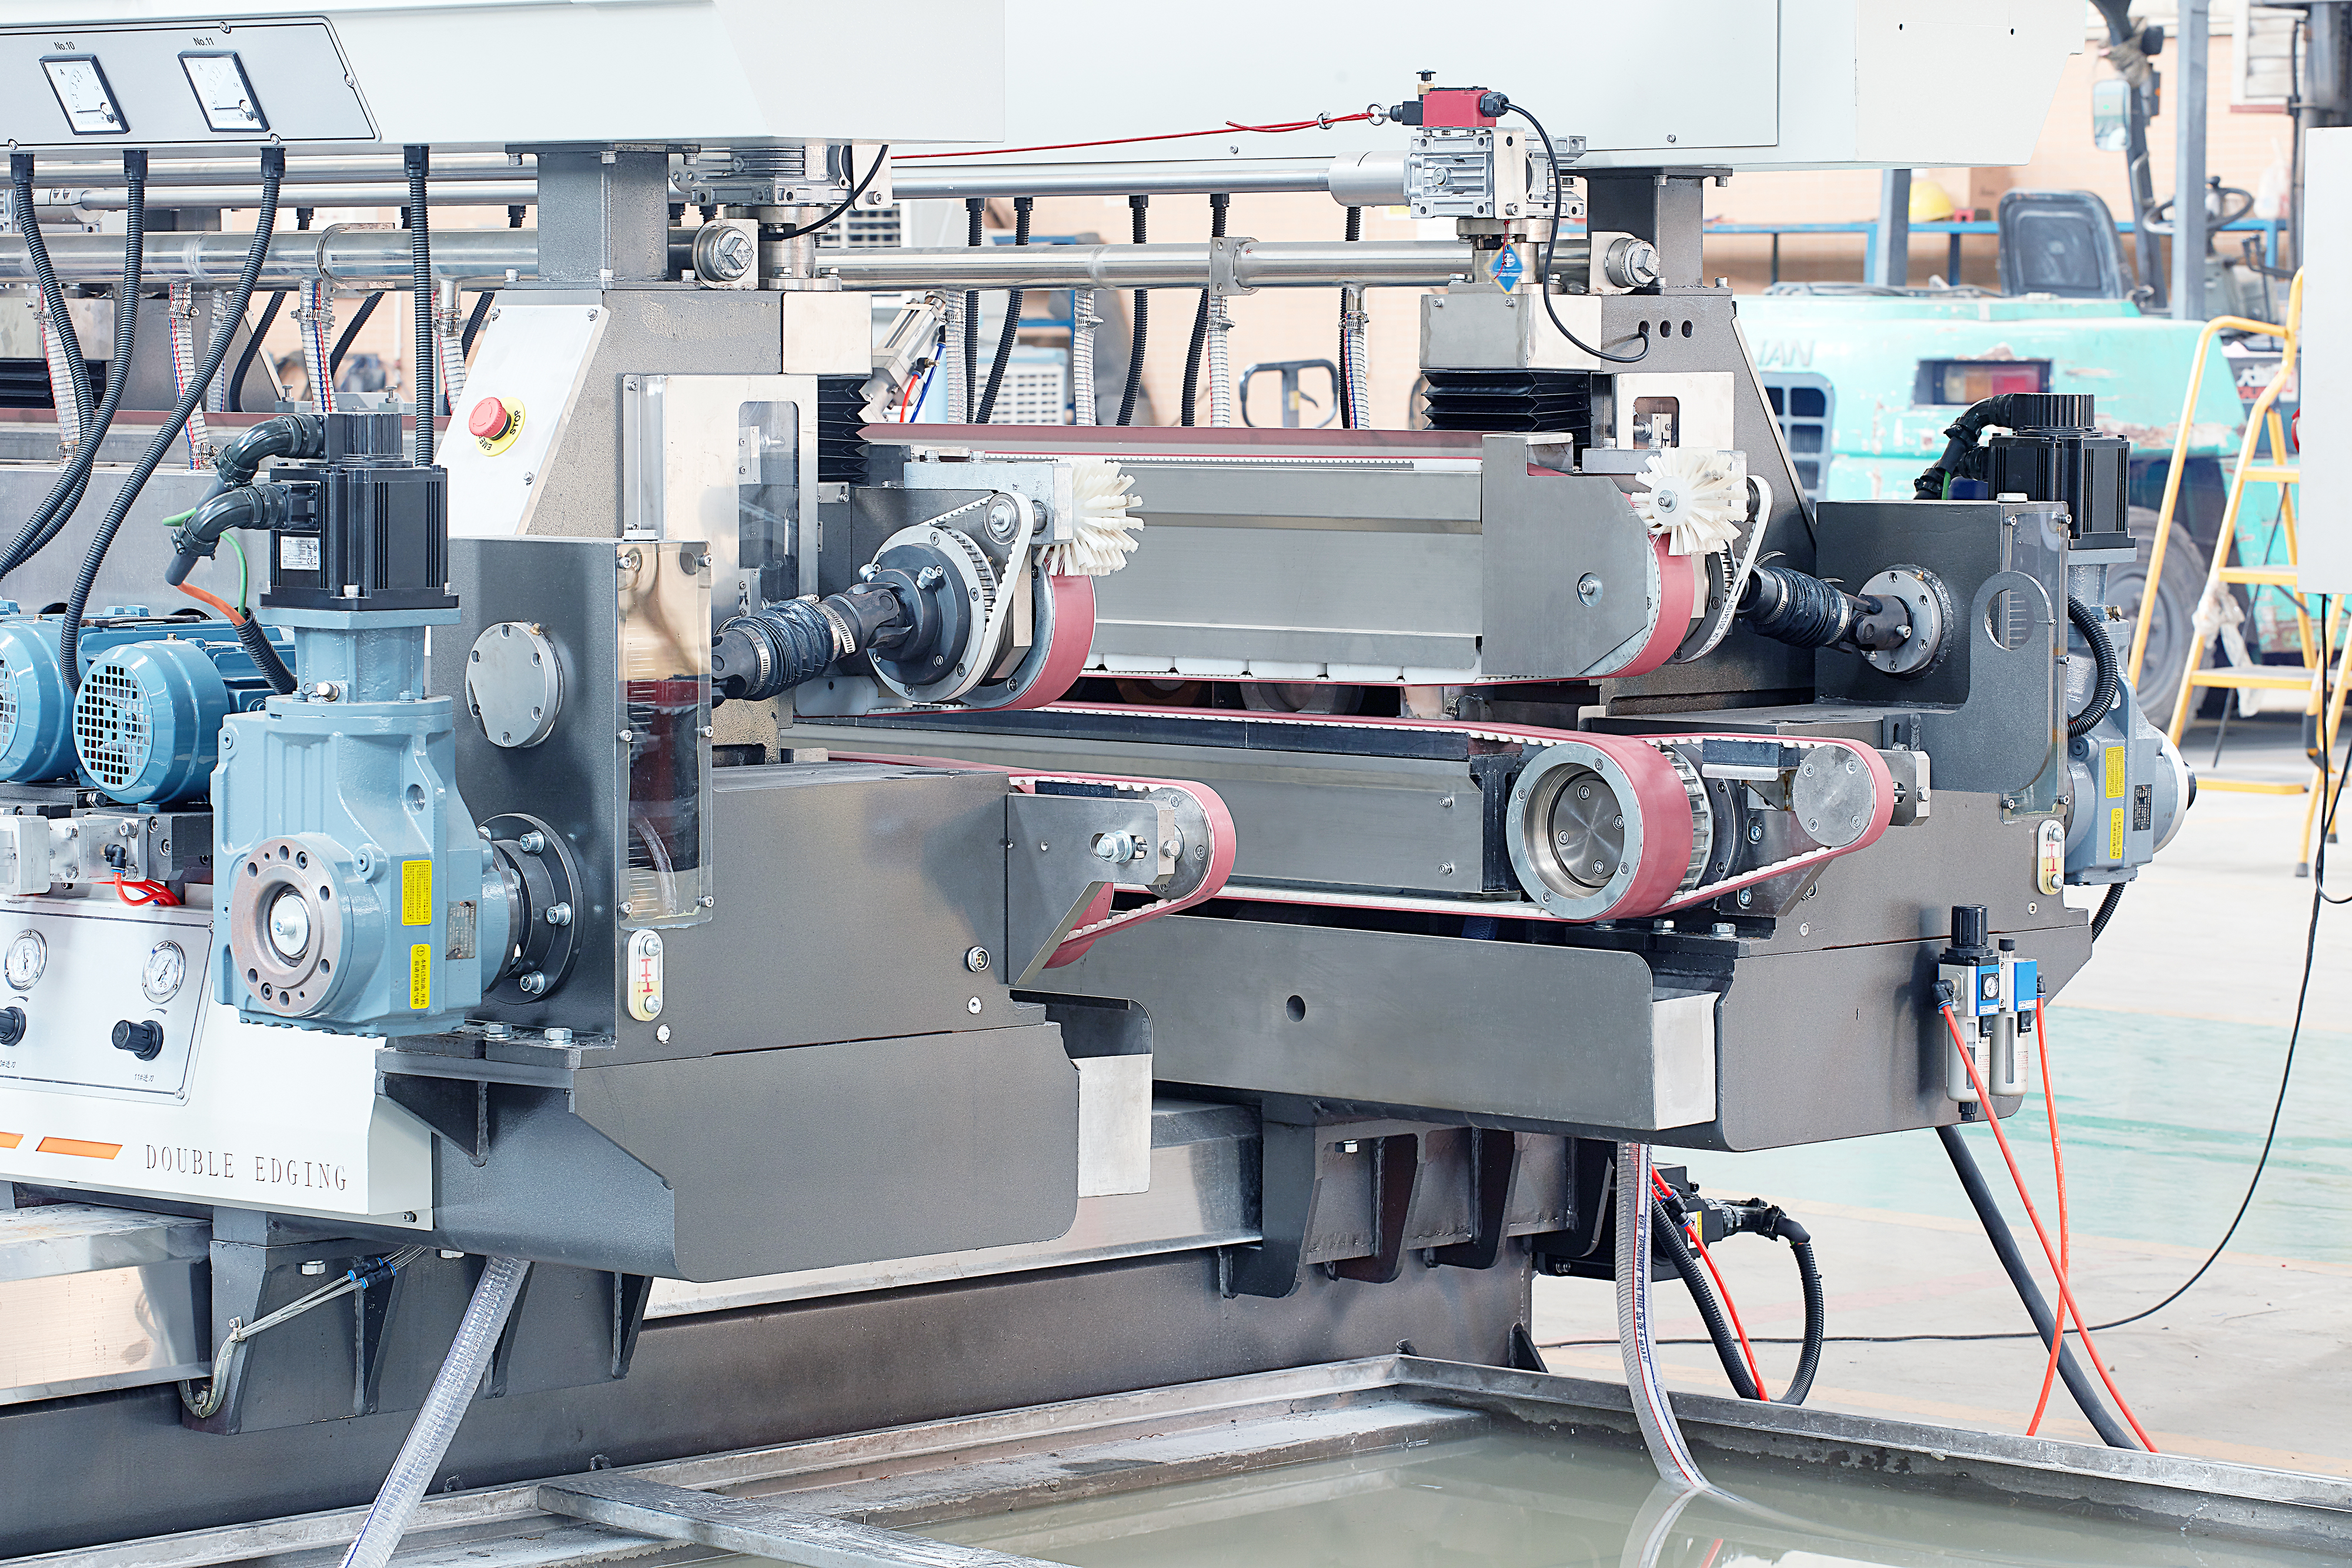 SM2040 20Spindles Glass Straight-line Double Edging Machine Manufacturers, SM2040 20Spindles Glass Straight-line Double Edging Machine Factory, Supply SM2040 20Spindles Glass Straight-line Double Edging Machine